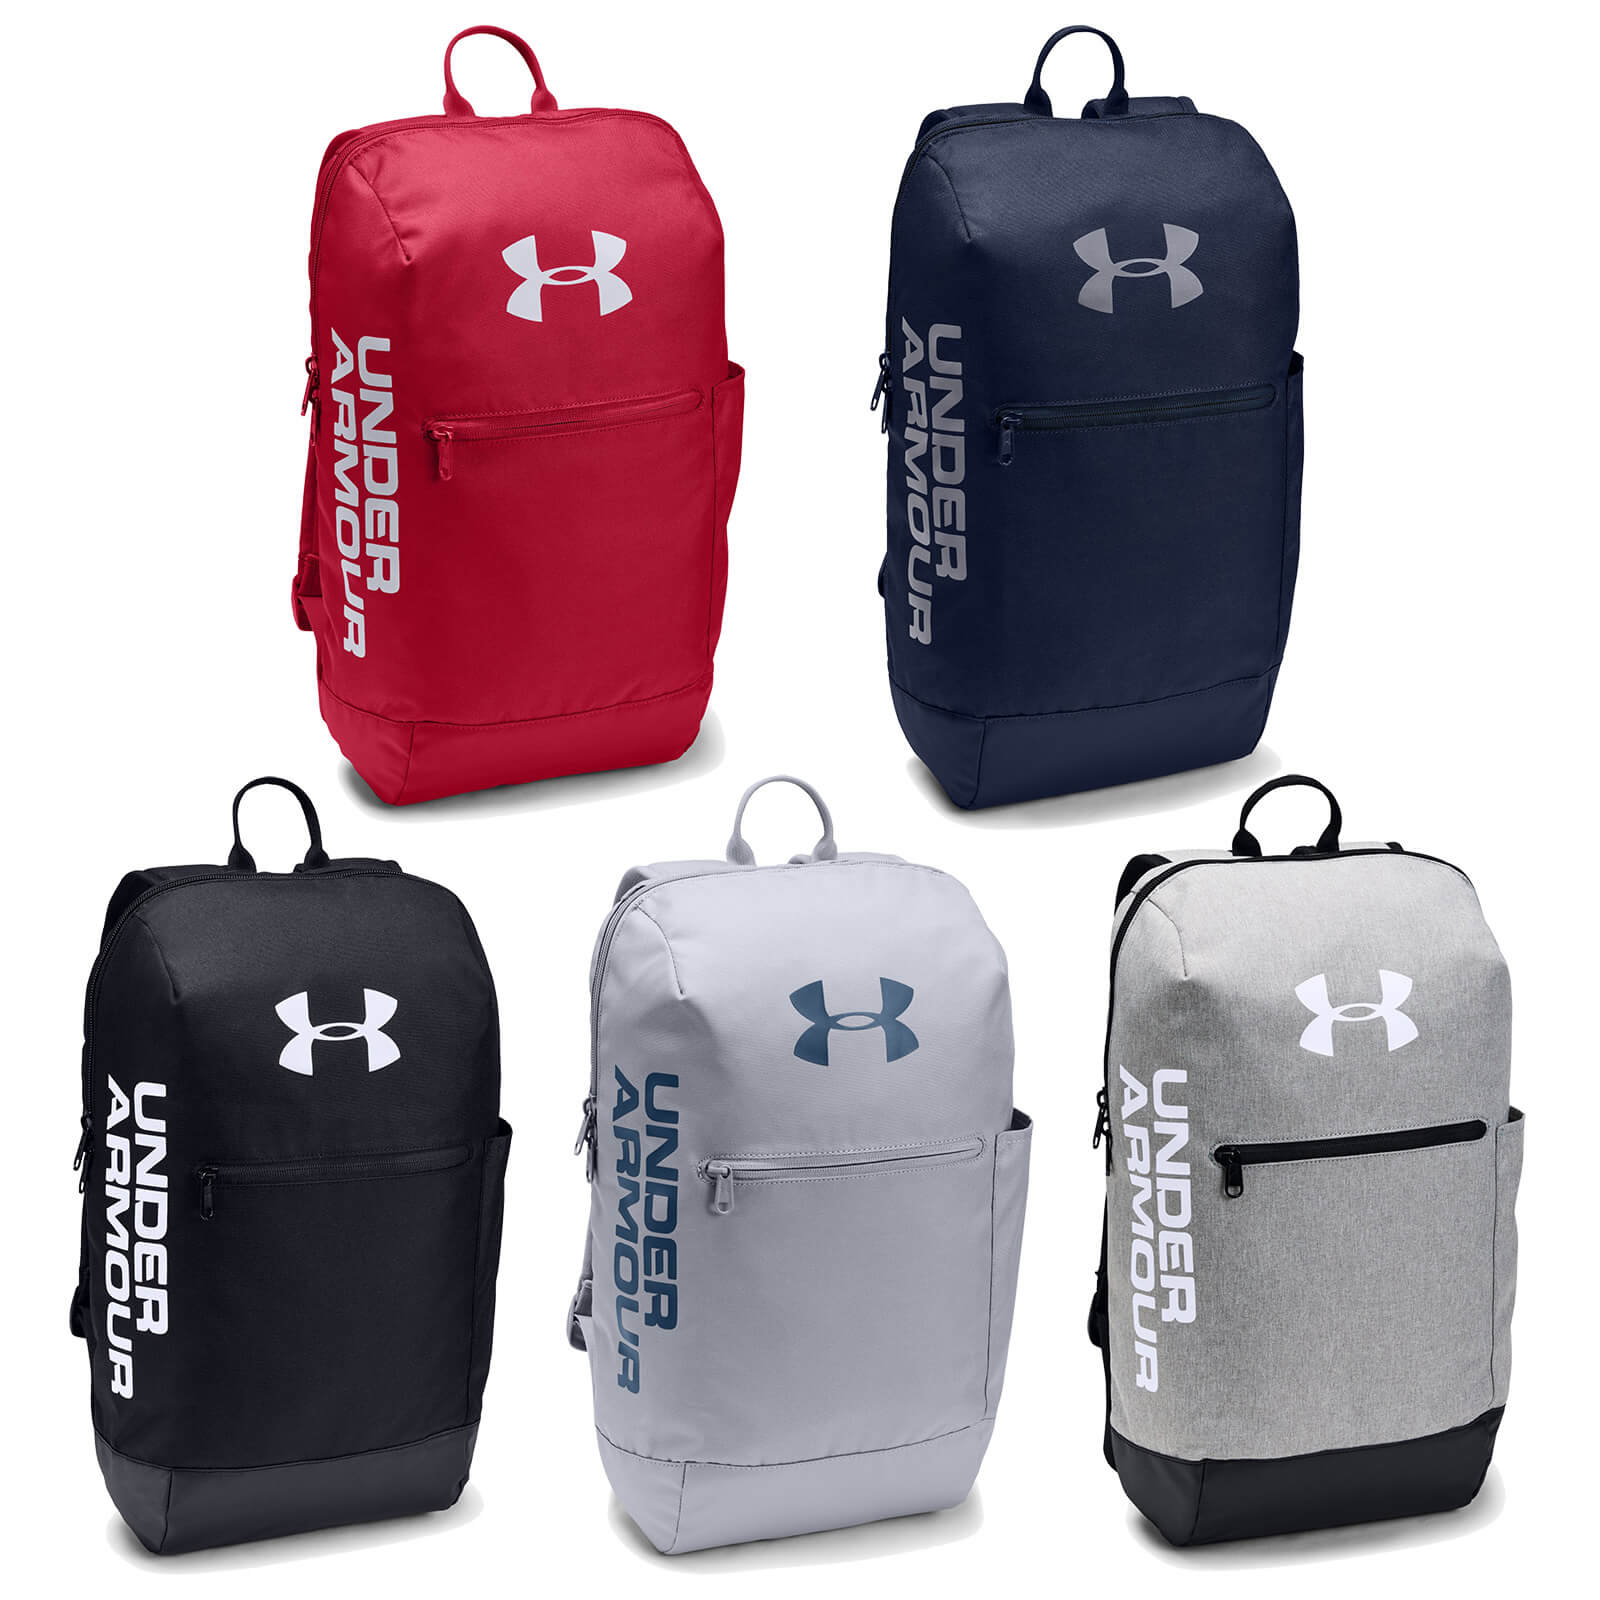 under armour patterson backpack